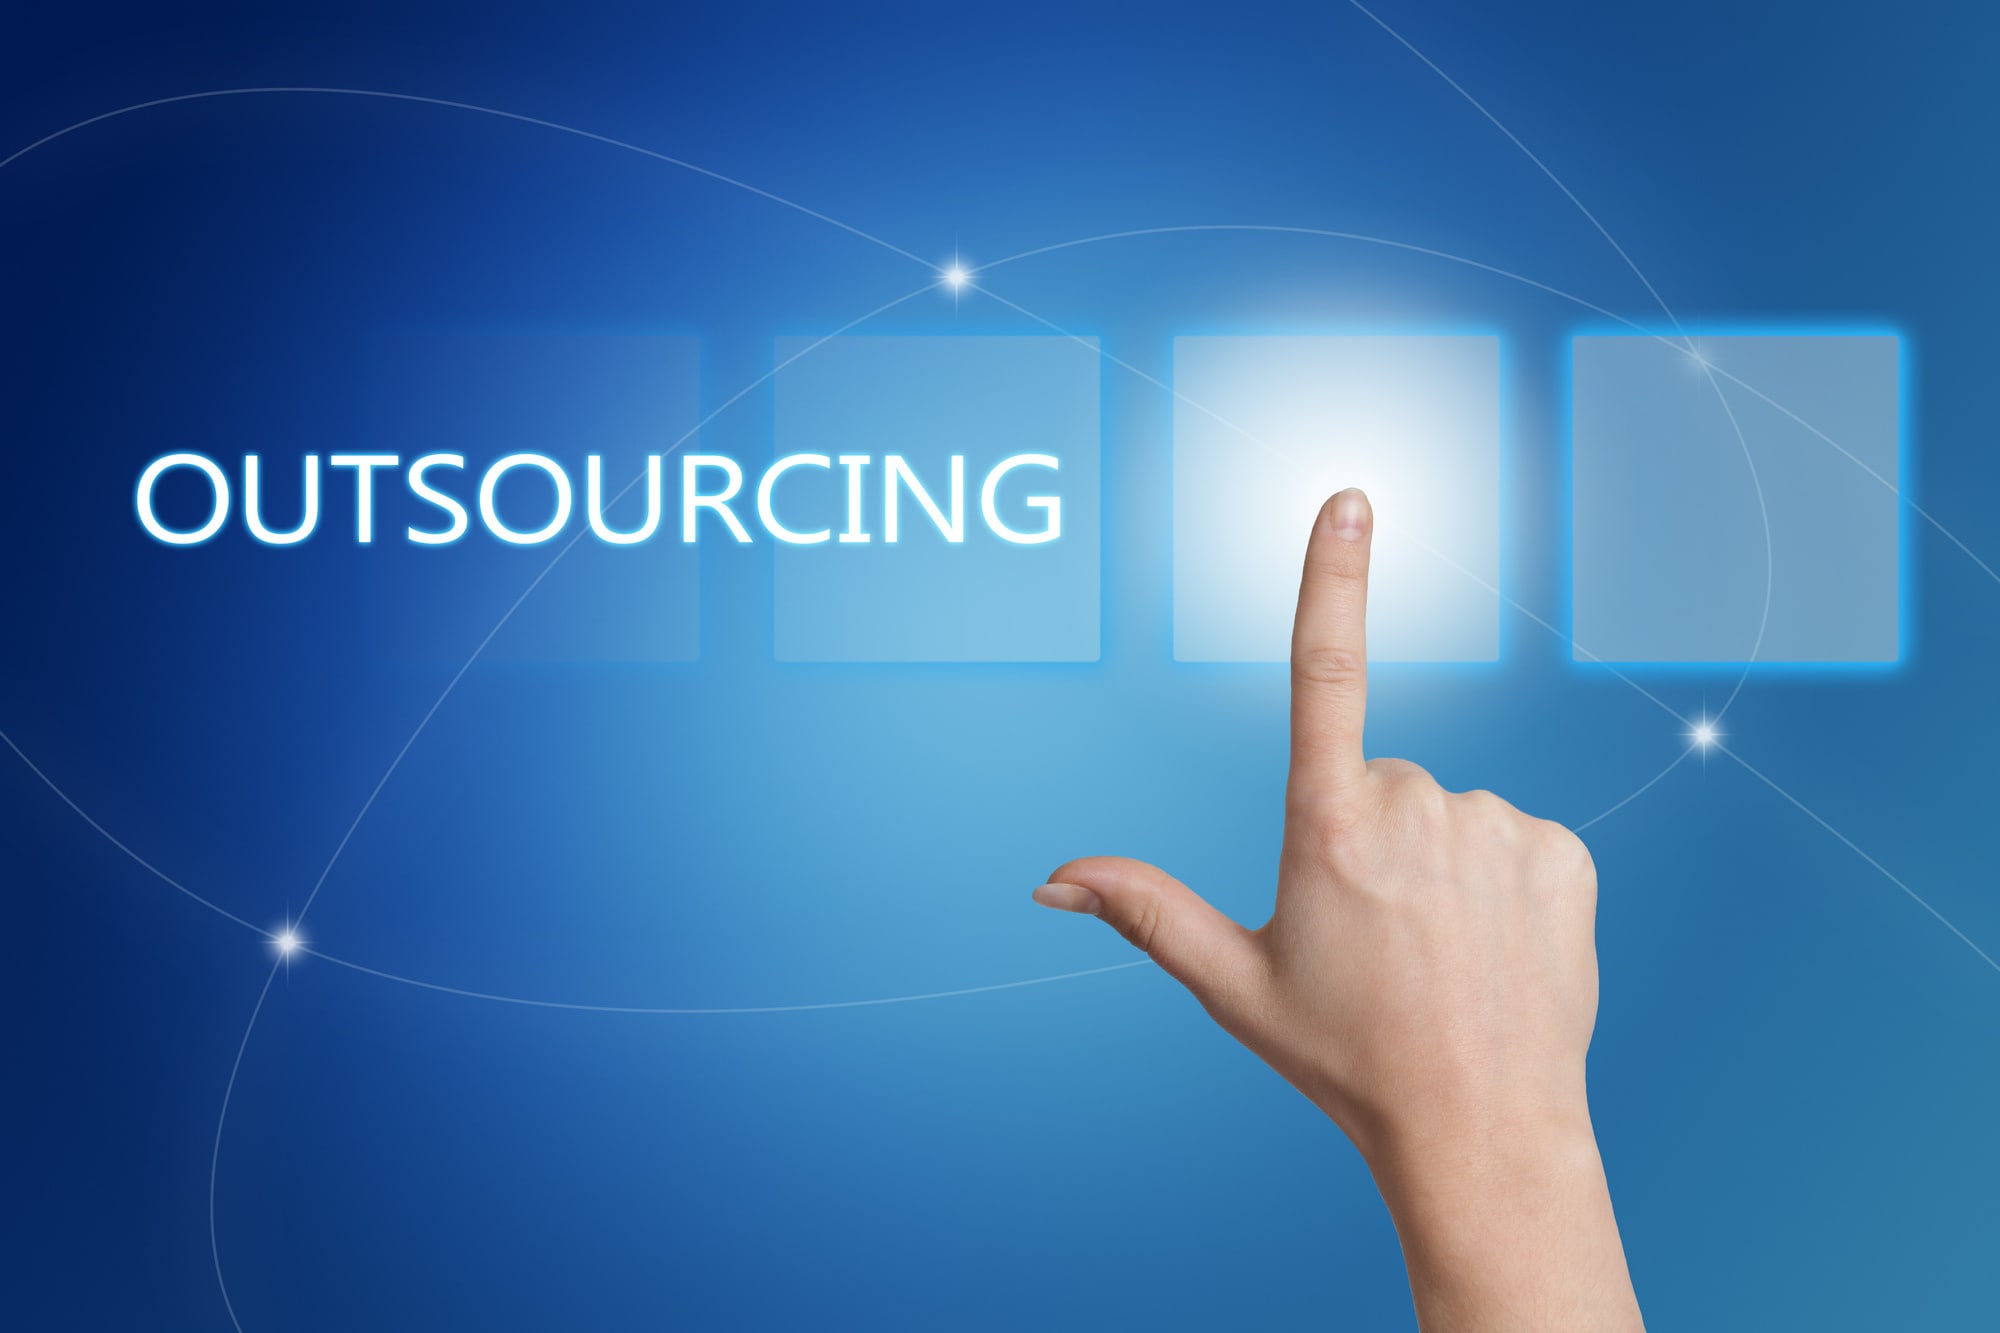 outsourcing companies